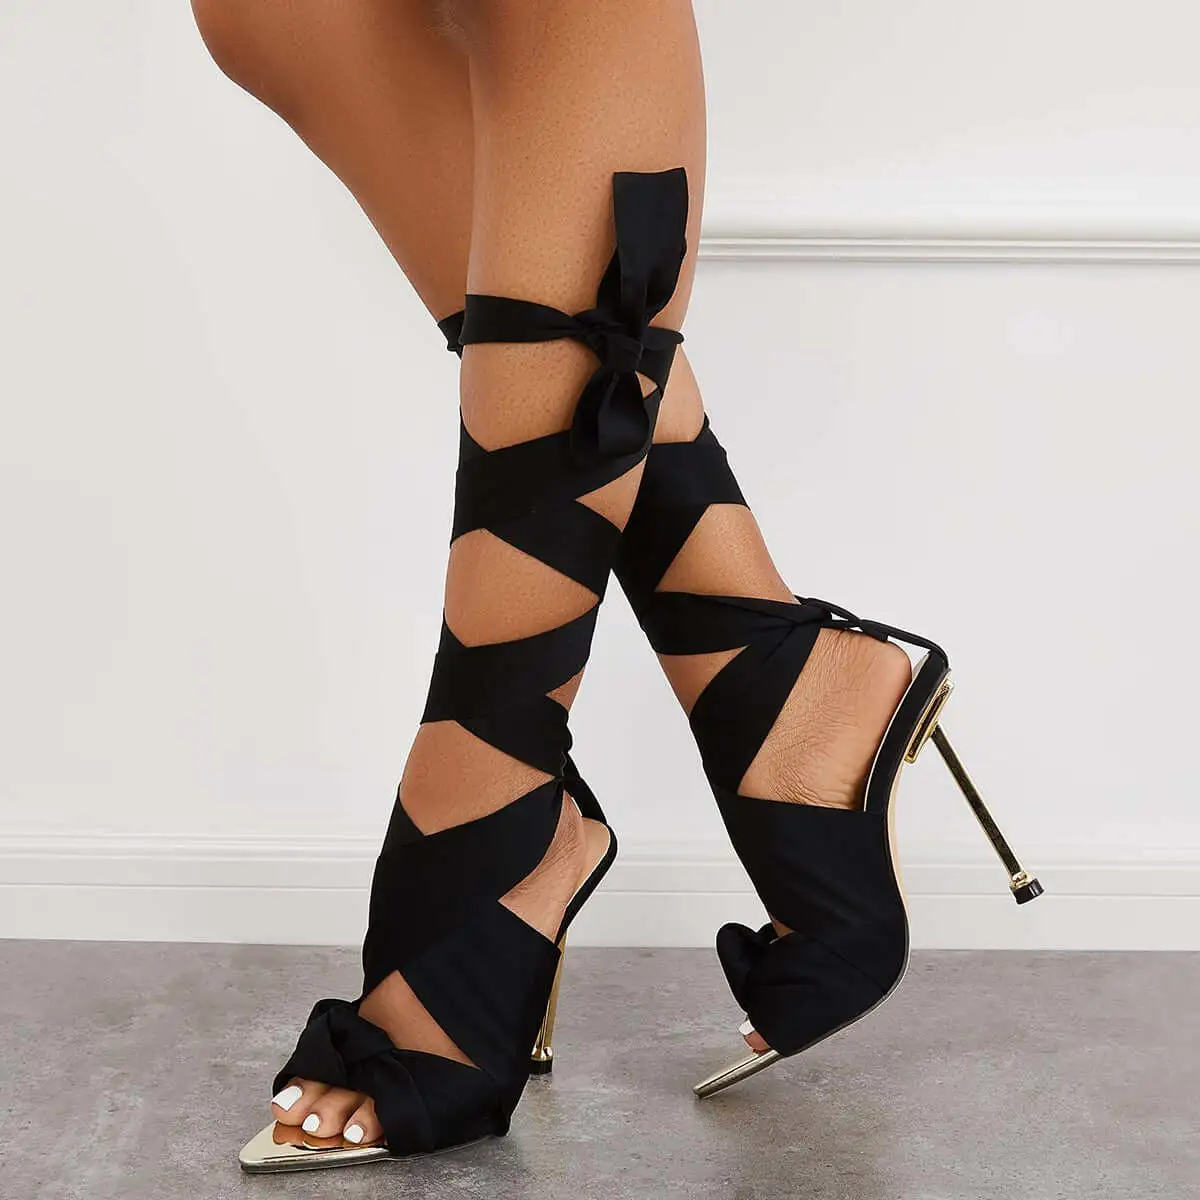 Ribbon Lace Up Ankle Strap Stiletto Sandals Dress High Heels